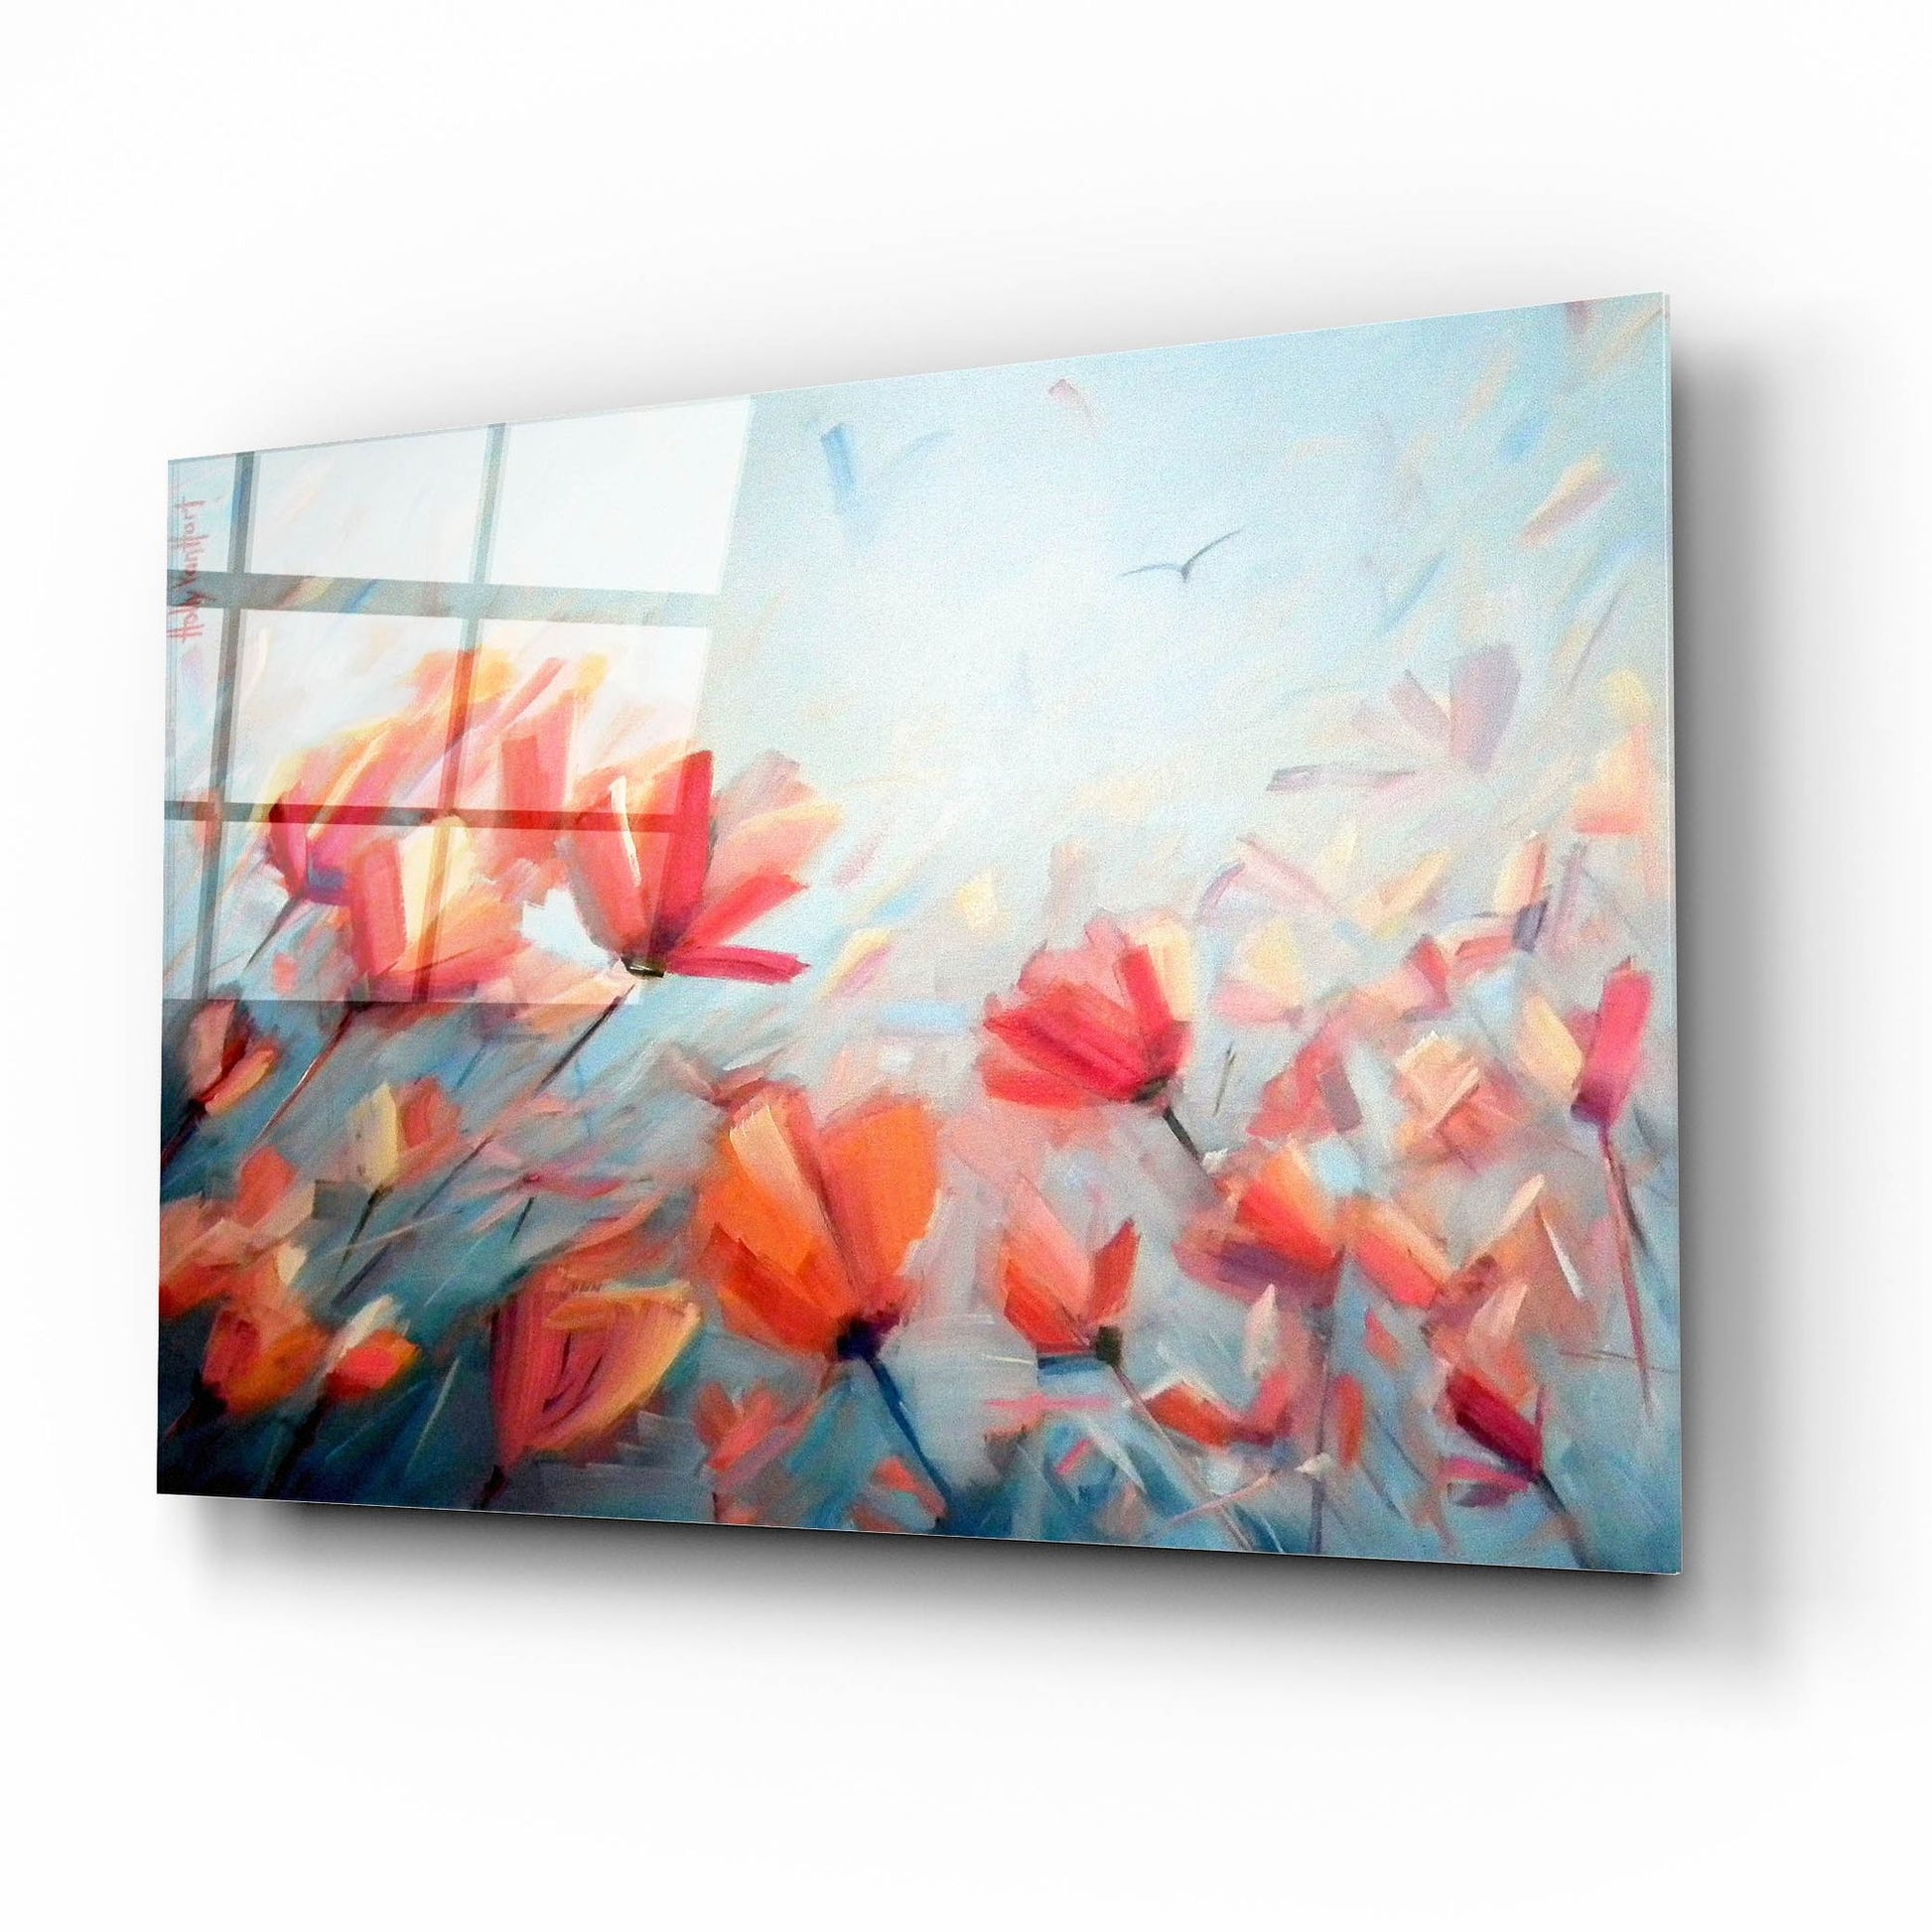 Epic Art 'Dreaming In Full Color' by Holly Van Hart, Acrylic Glass Wall Art,16x12